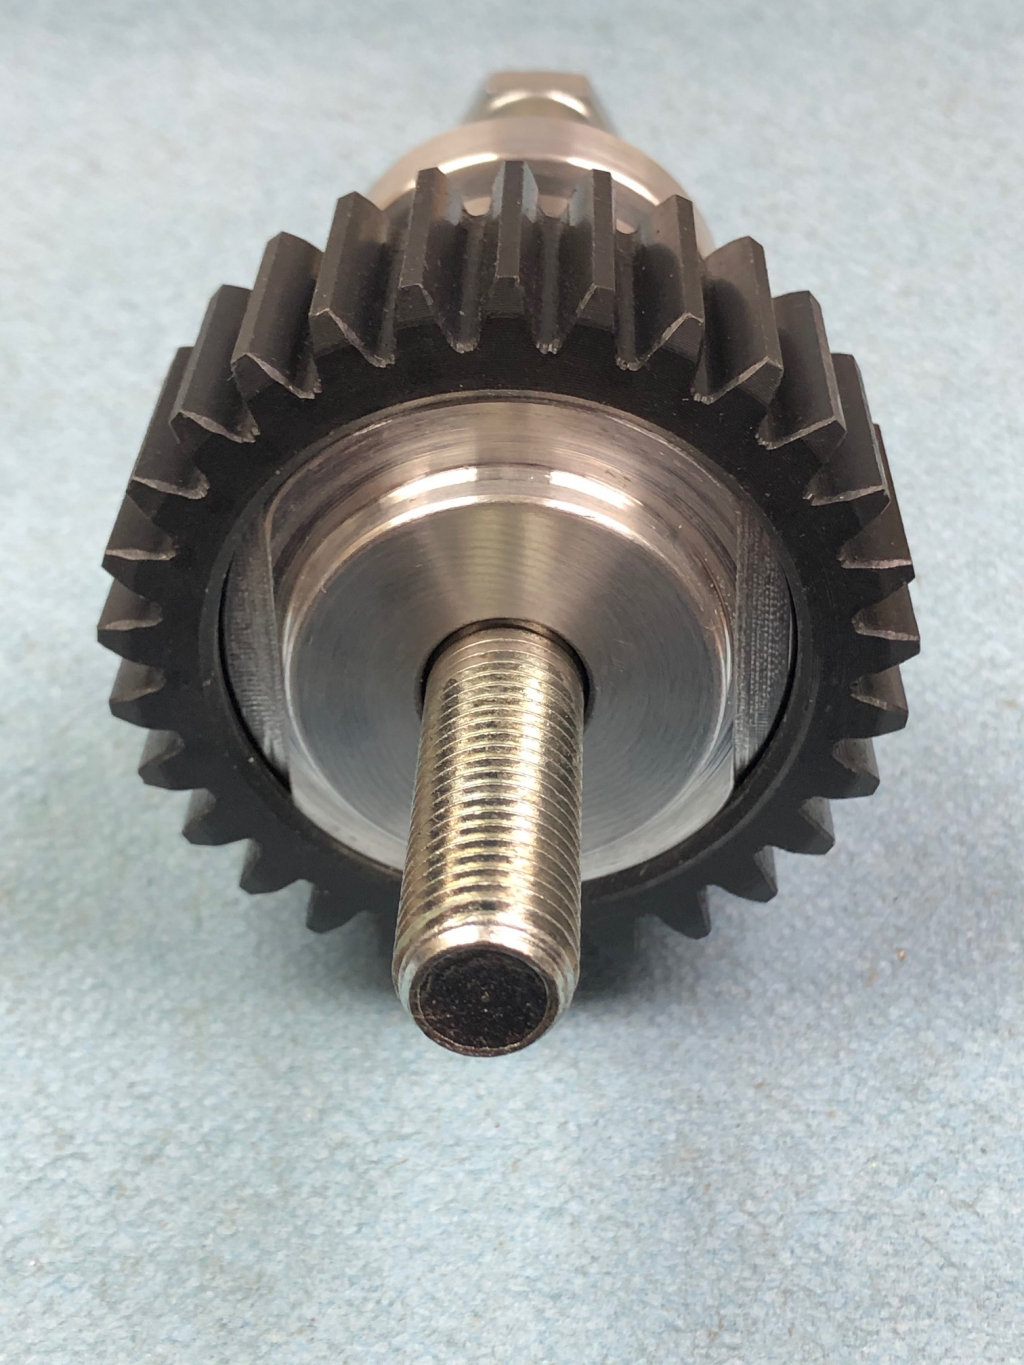 Tool for aligning and centering the clutch plates so that the clutch input hub on the transmission can be installed.